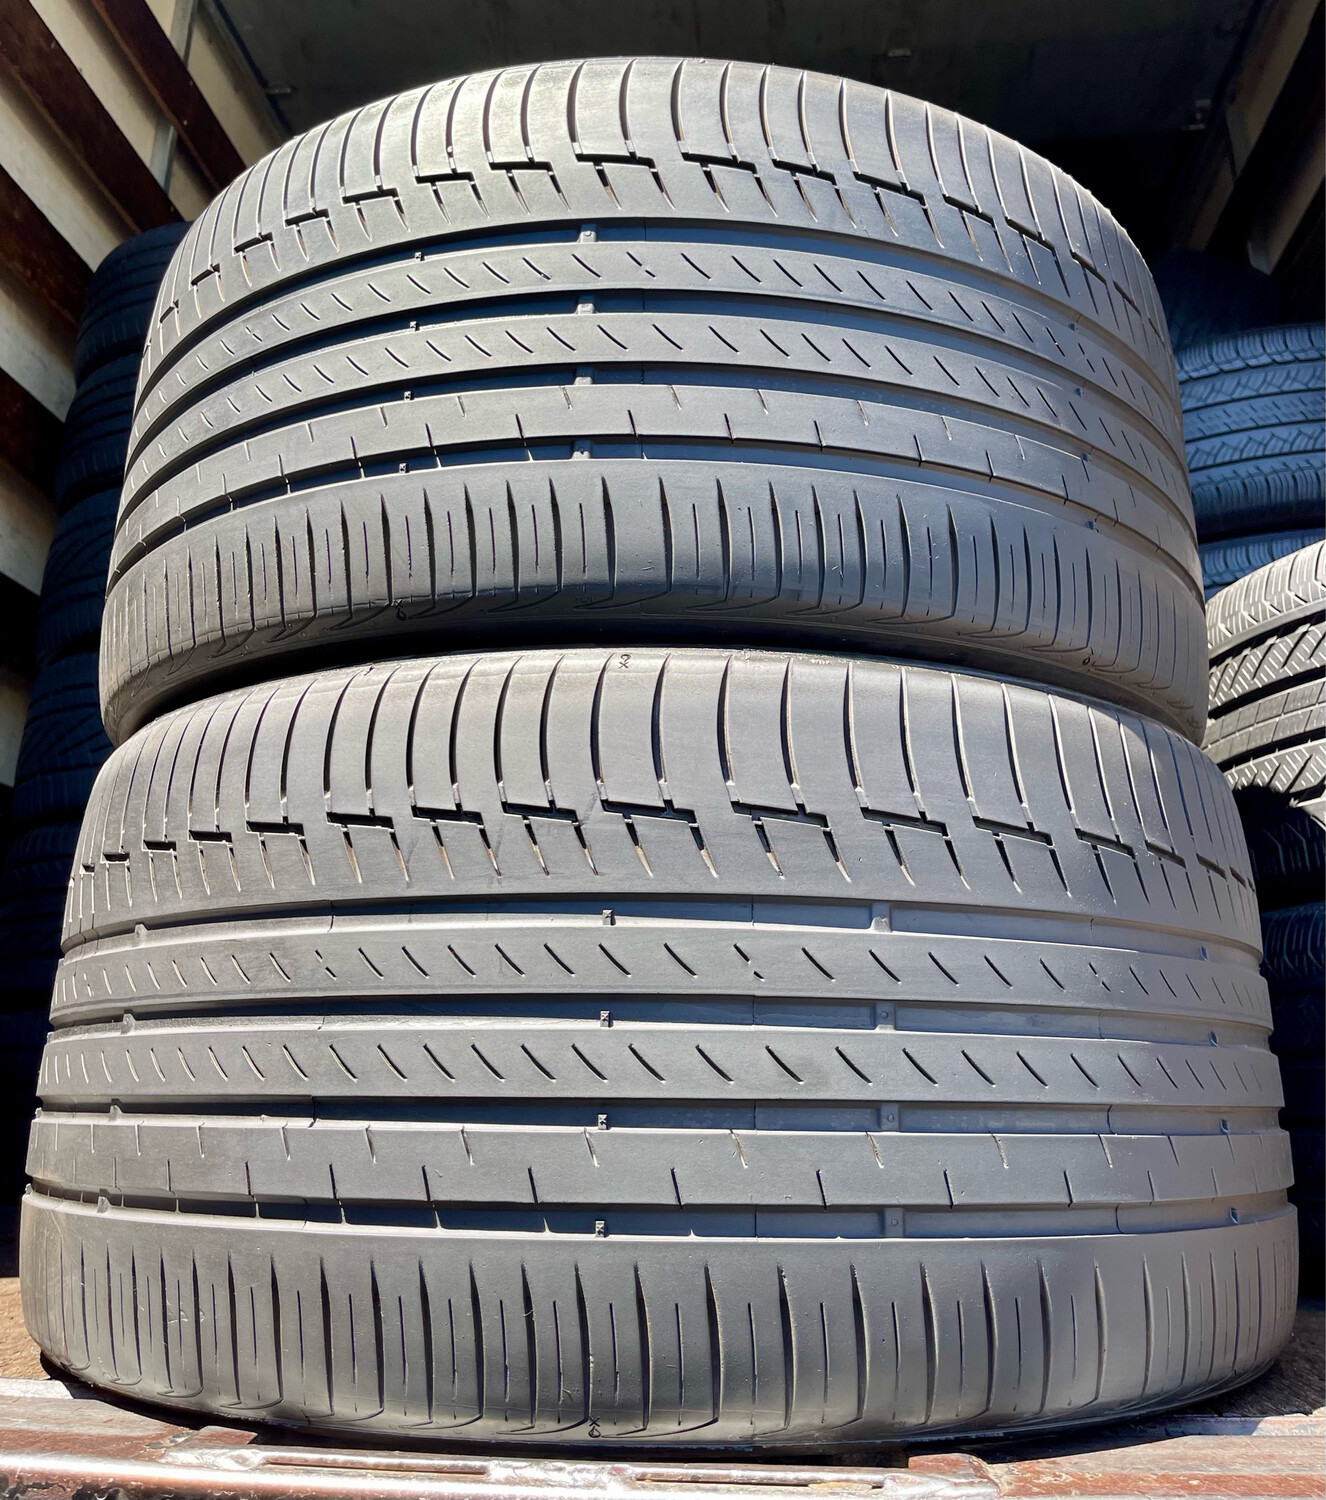 2 USED TIRES 315/30R22 Continental PREMIUM CONTACT 6 WITH 75%TREAD LIFE